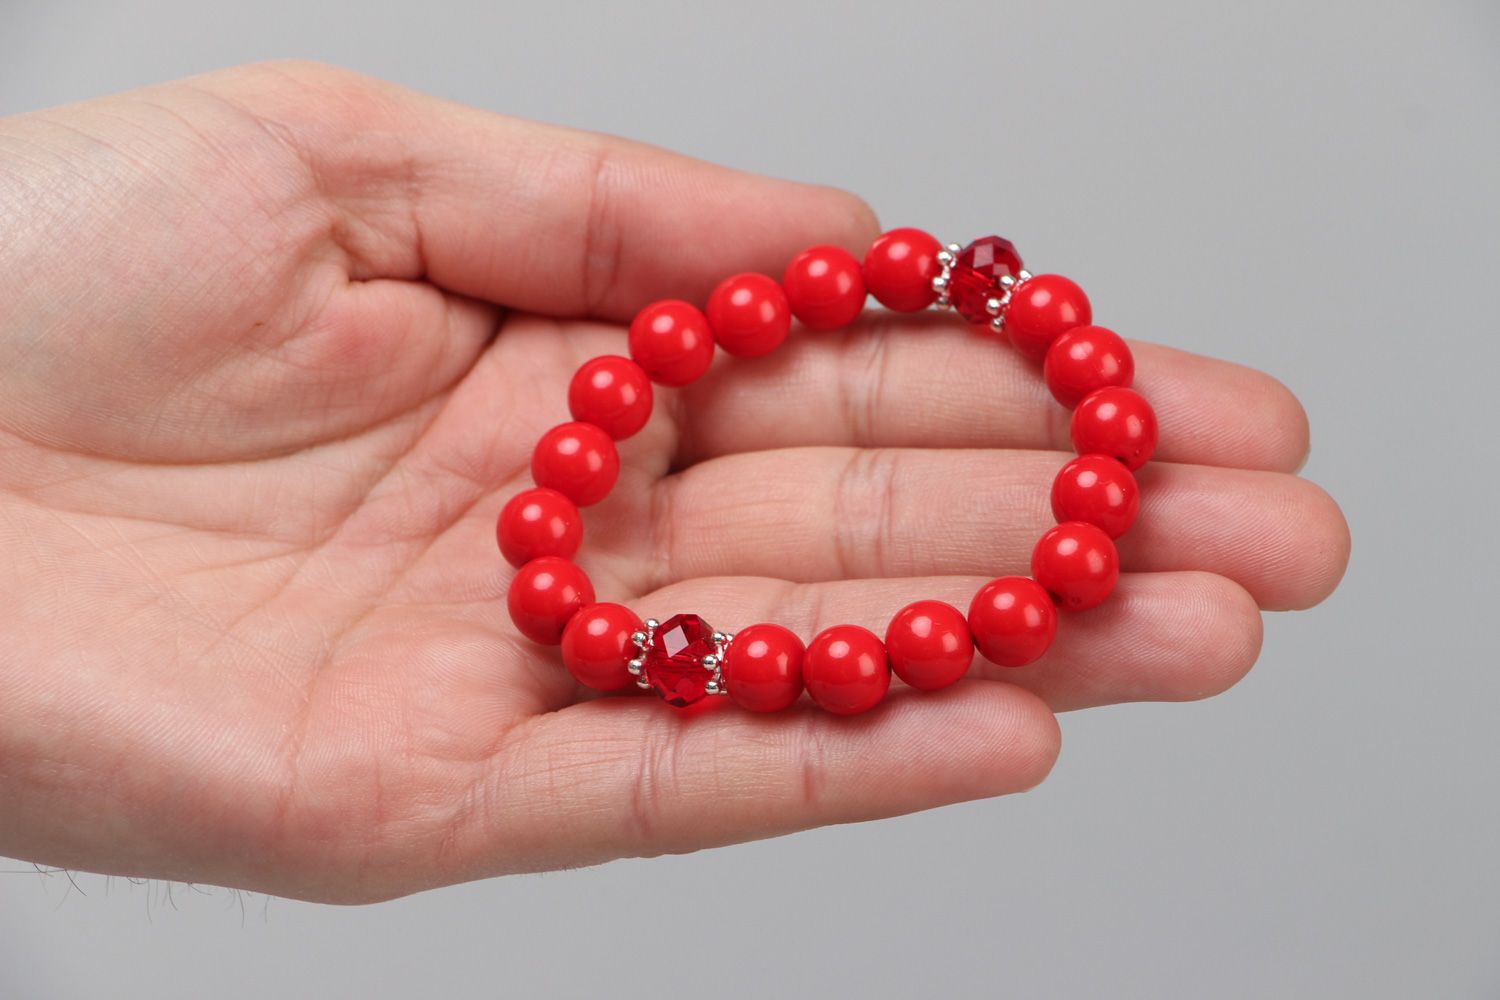 Handmade wrist bracelet with bright red plastic and glass beads for women photo 3